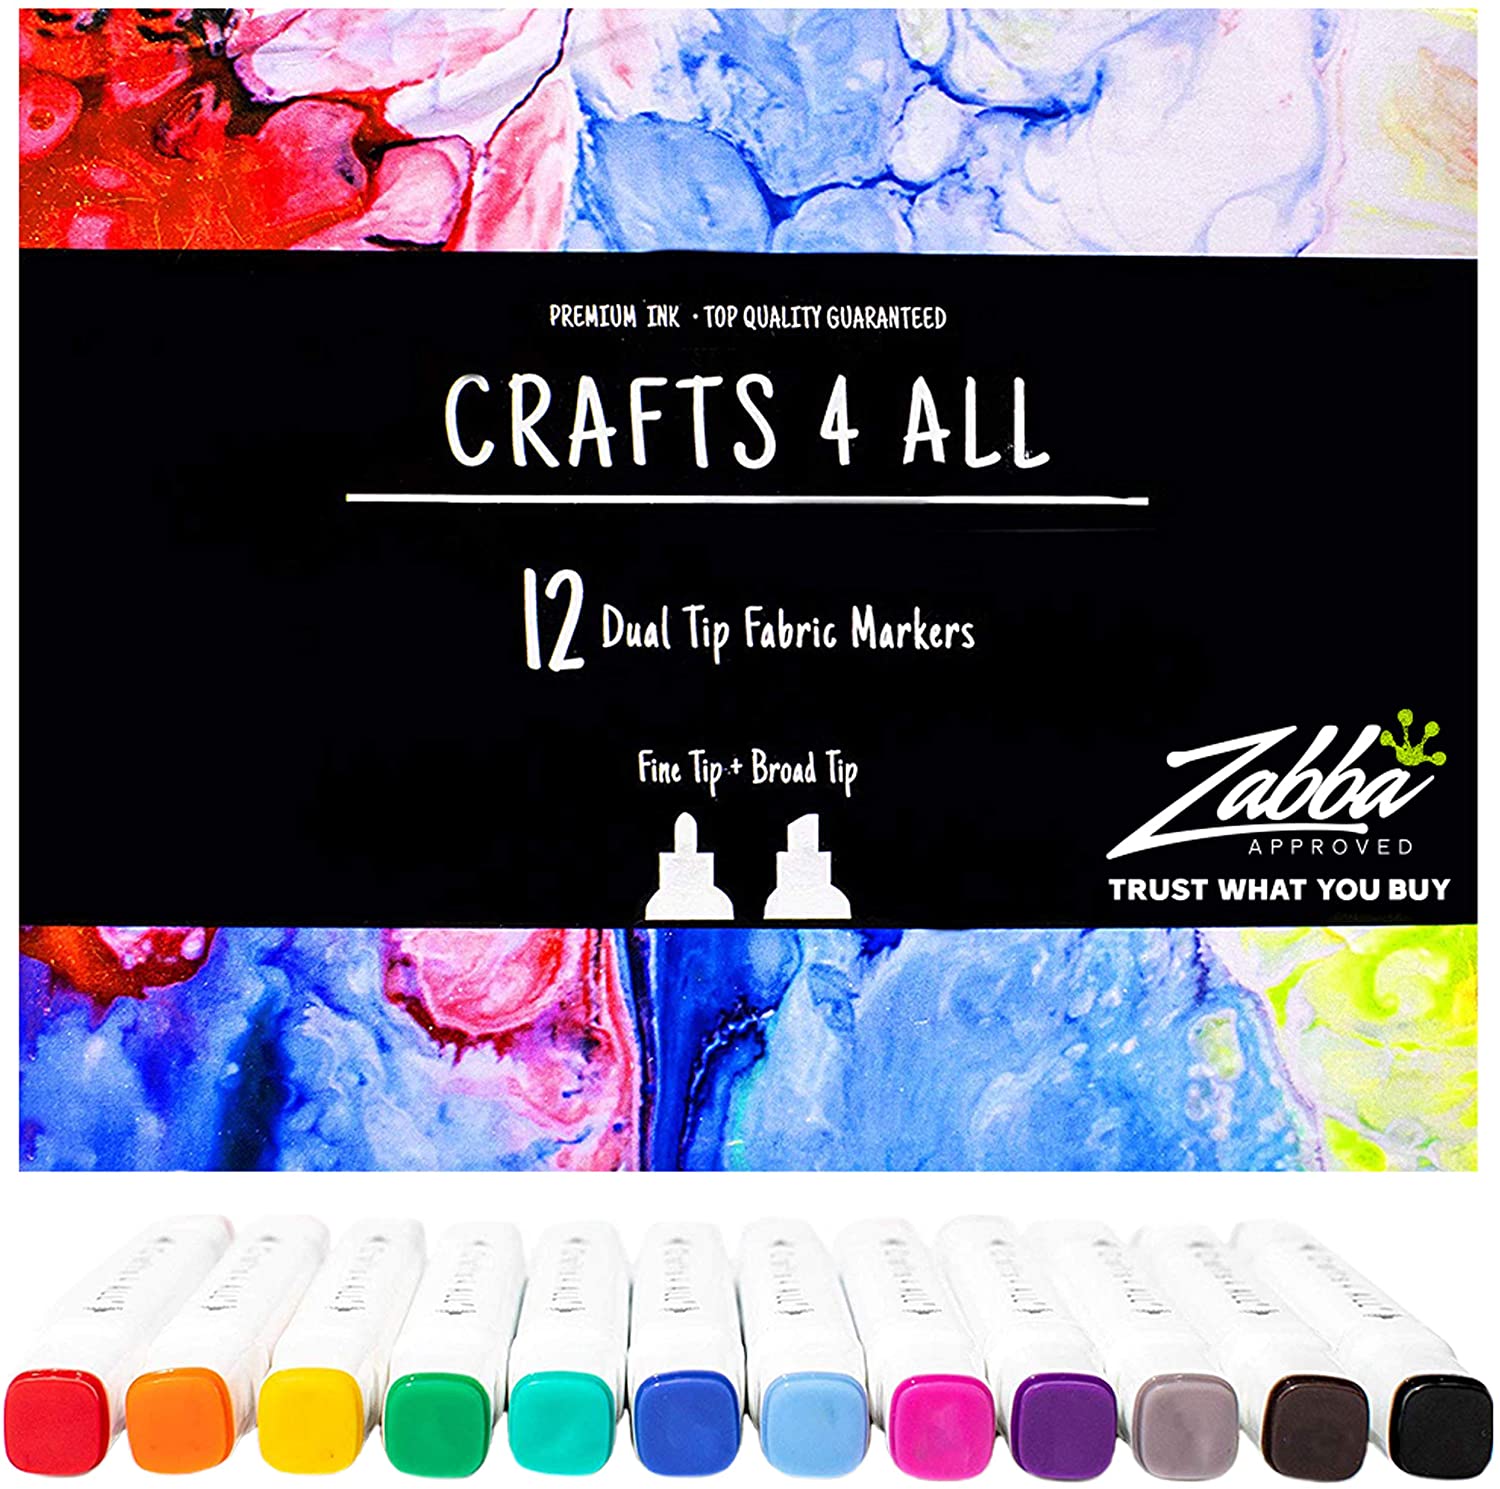 Crafts 4 ALL 12 Dual Tip Fabric Markers